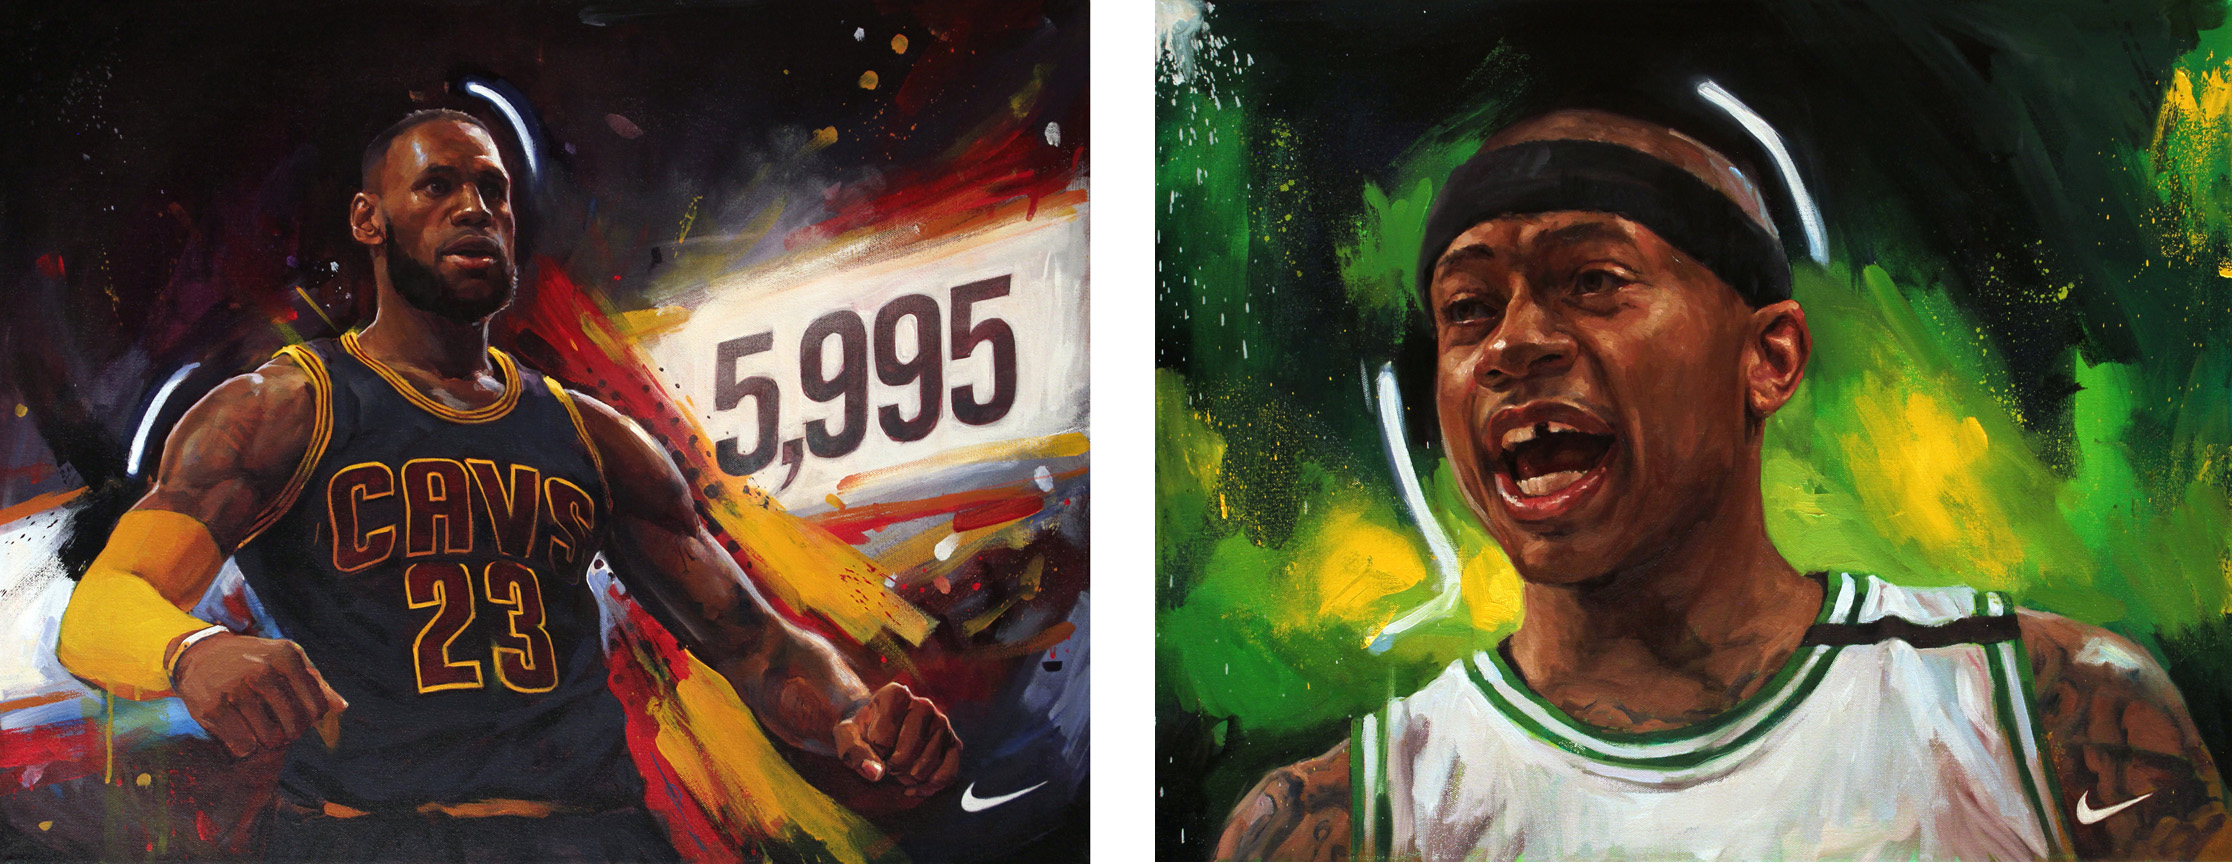 Social Media campaign for Nike NBA and space150 / Overnight portraits of NBA playoff moments / Lebron James / Isaiah Thomas, 2017